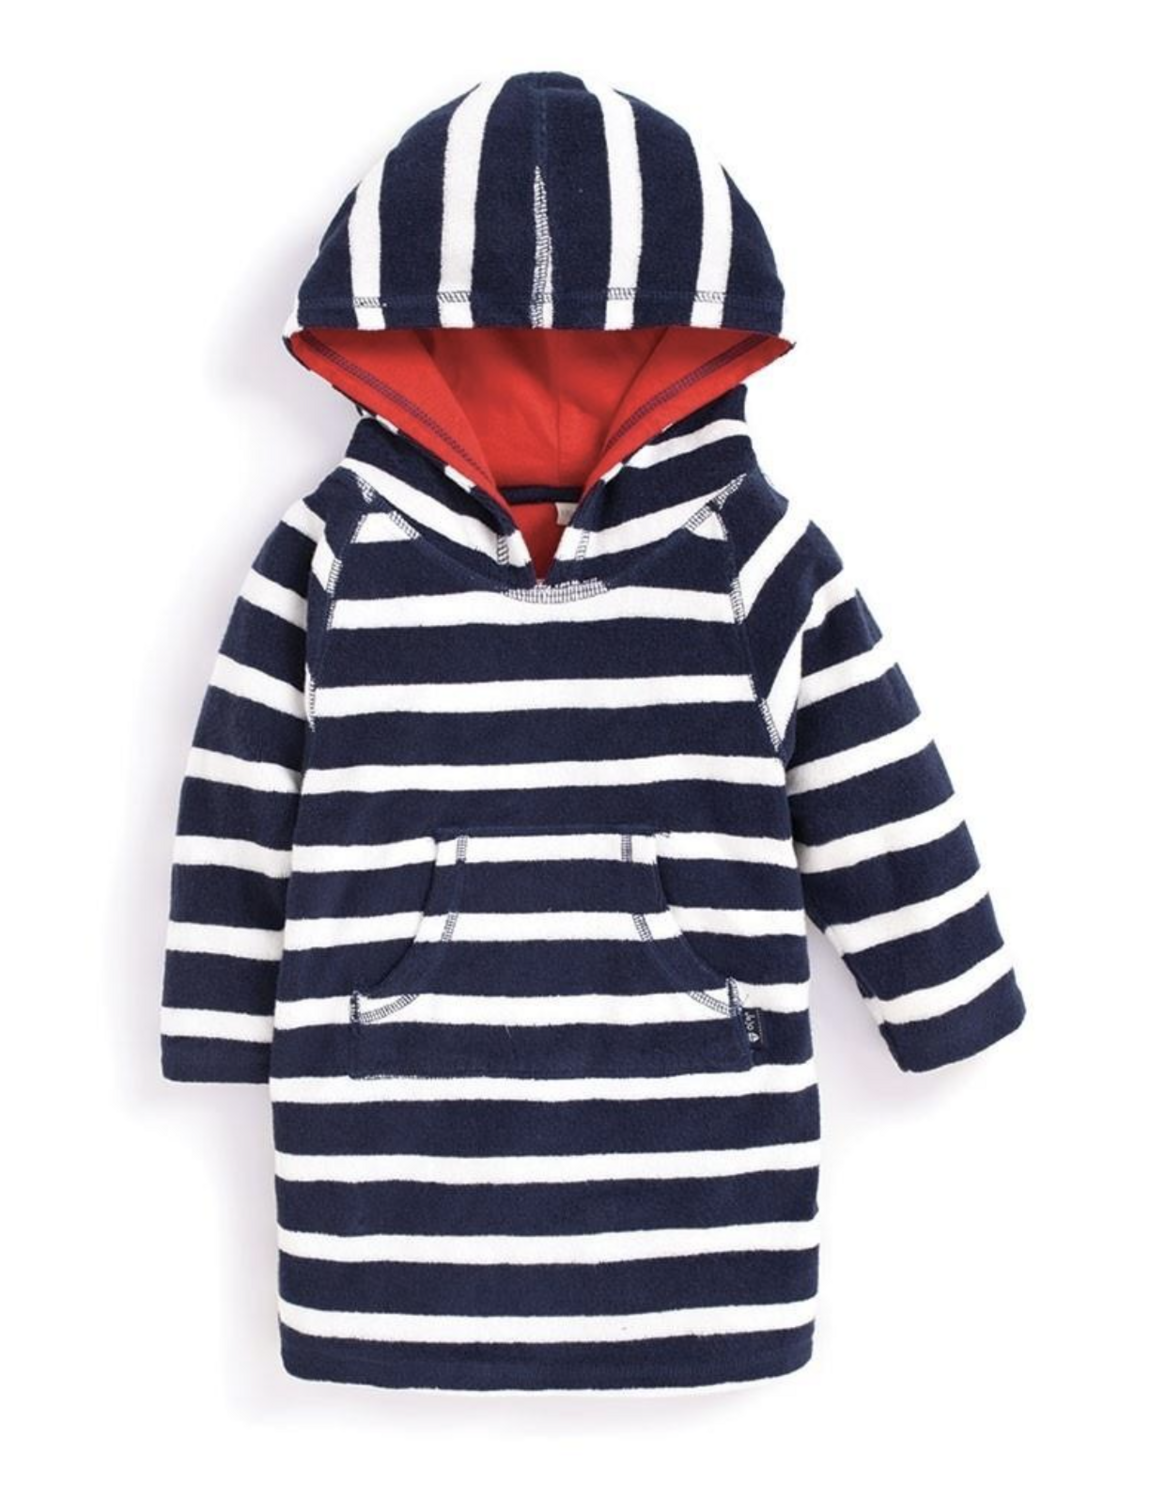 Stripe Towelling Pull On Navy 2/3 